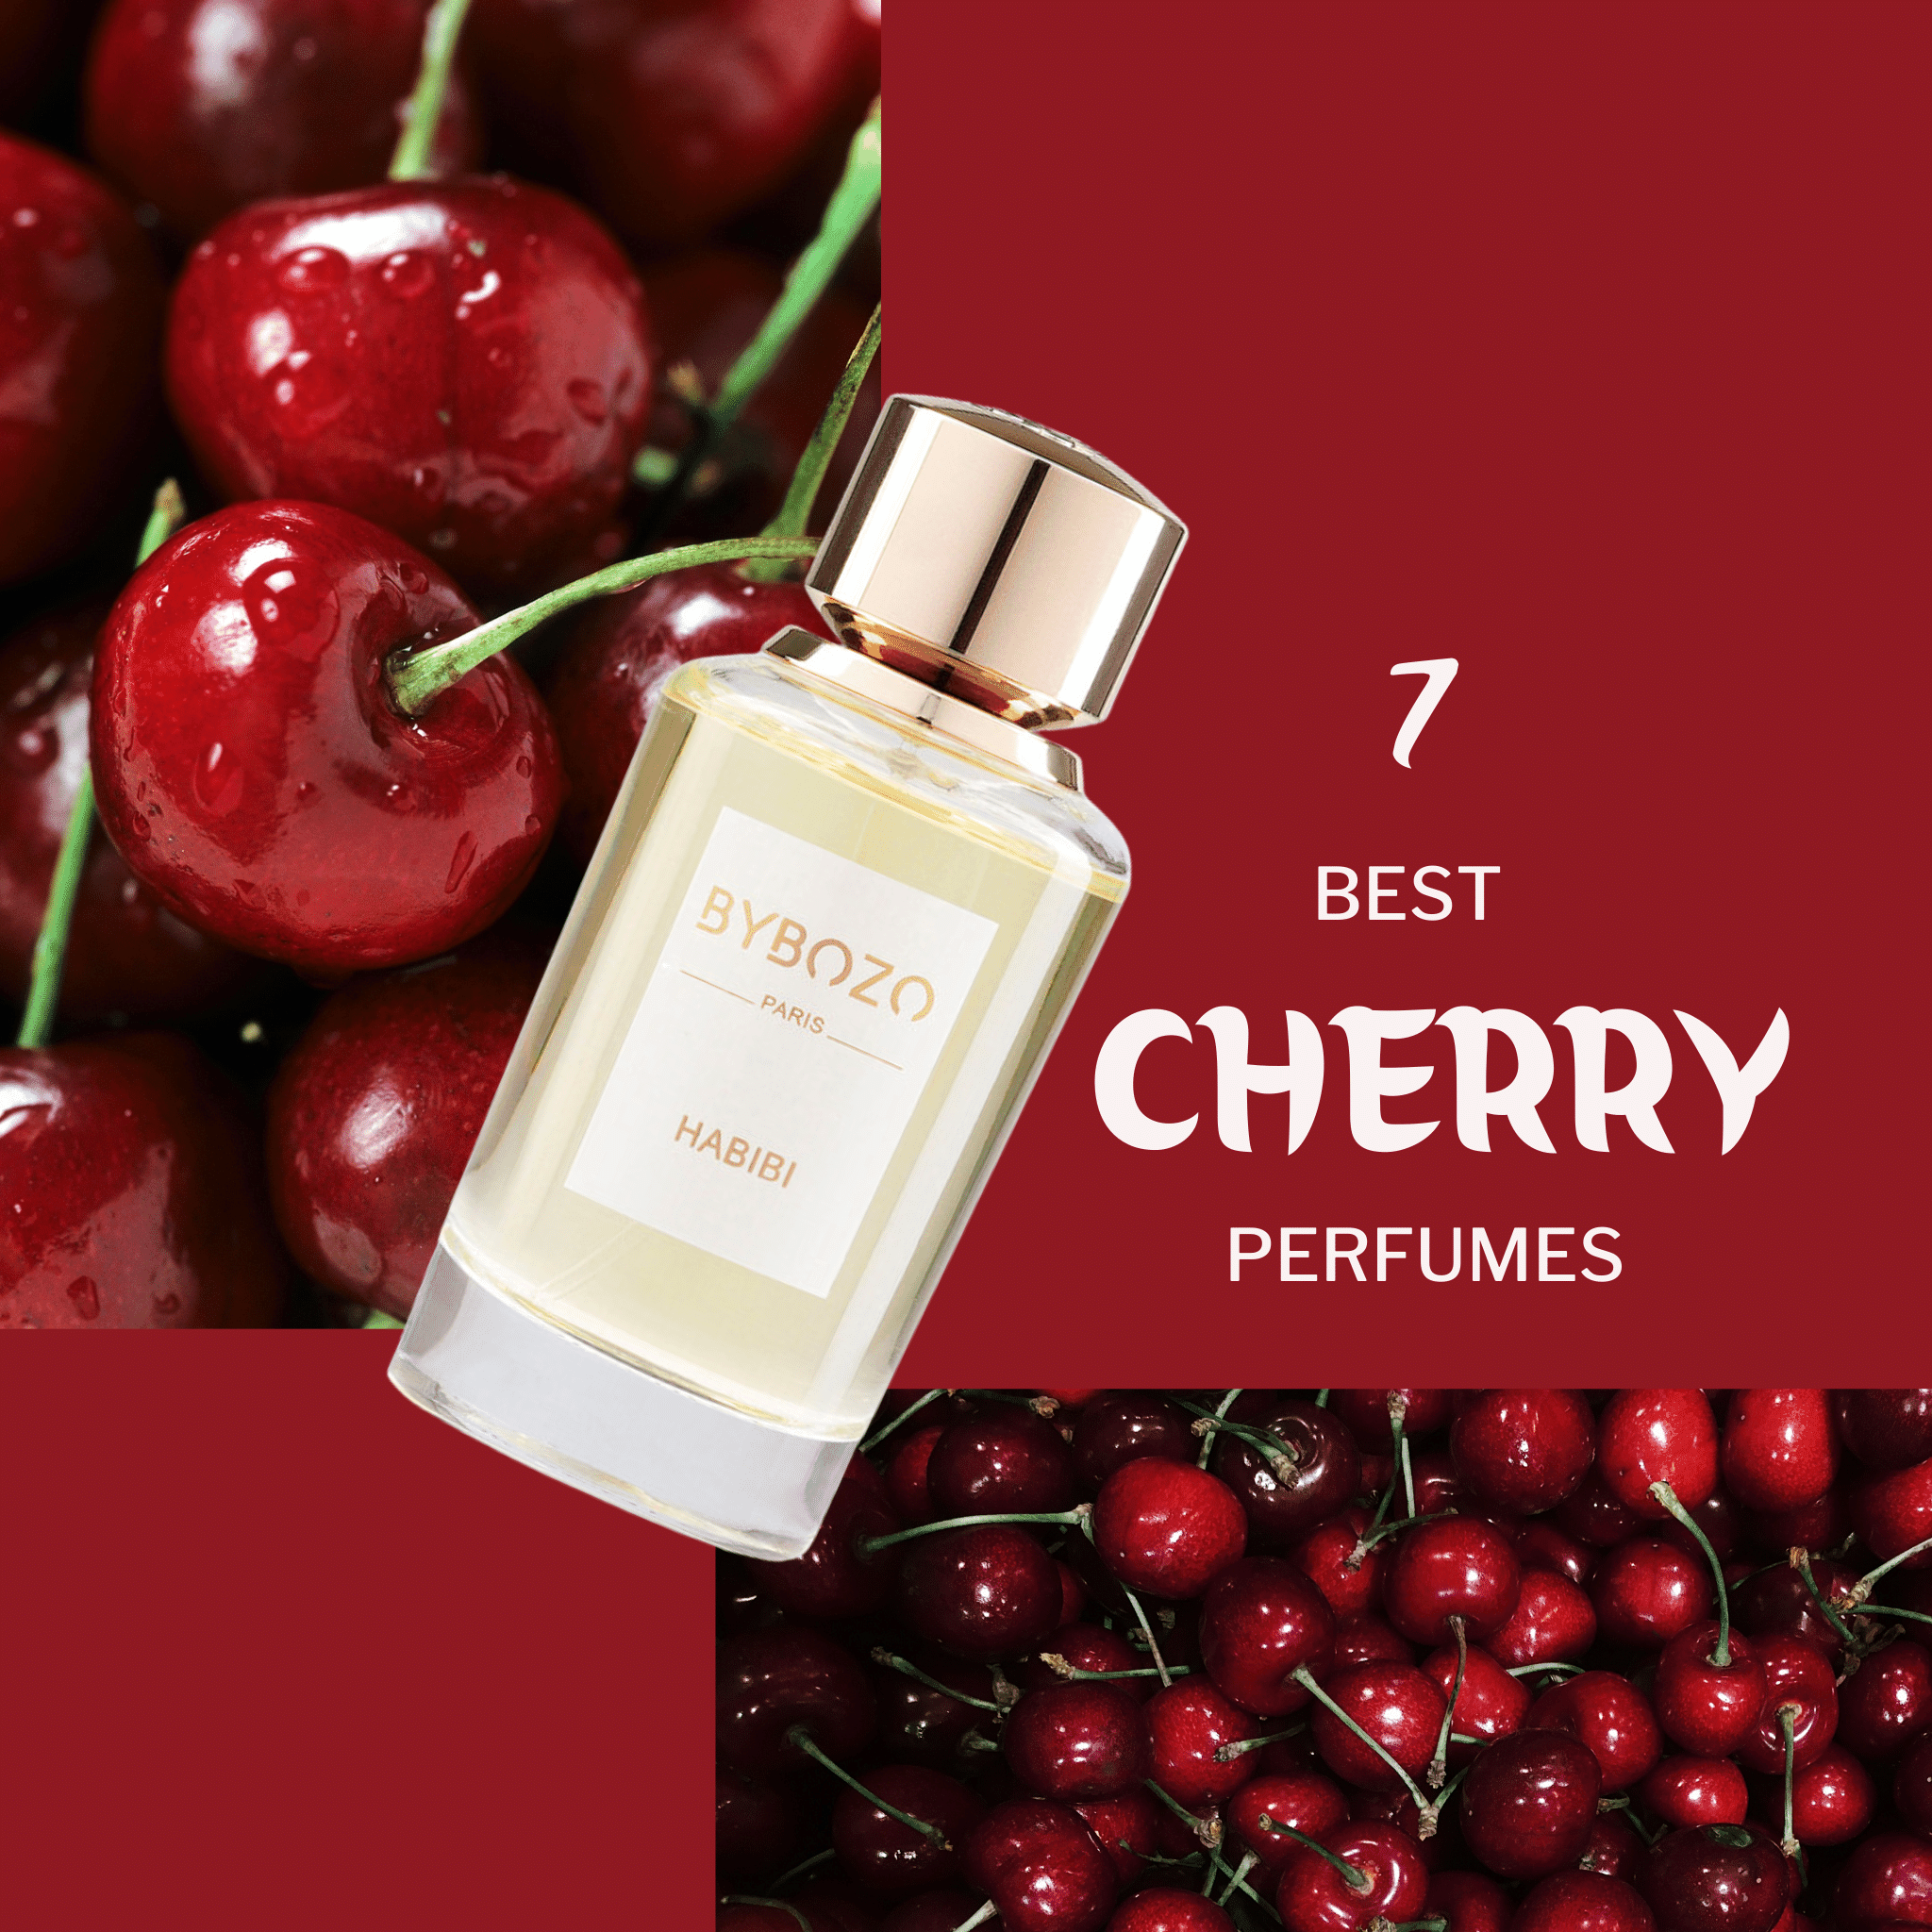 7 BEST CHERRY PERFUMES I EVER TRIED: TOP SEDUCTIVE FRAGRANCES TO WEAR